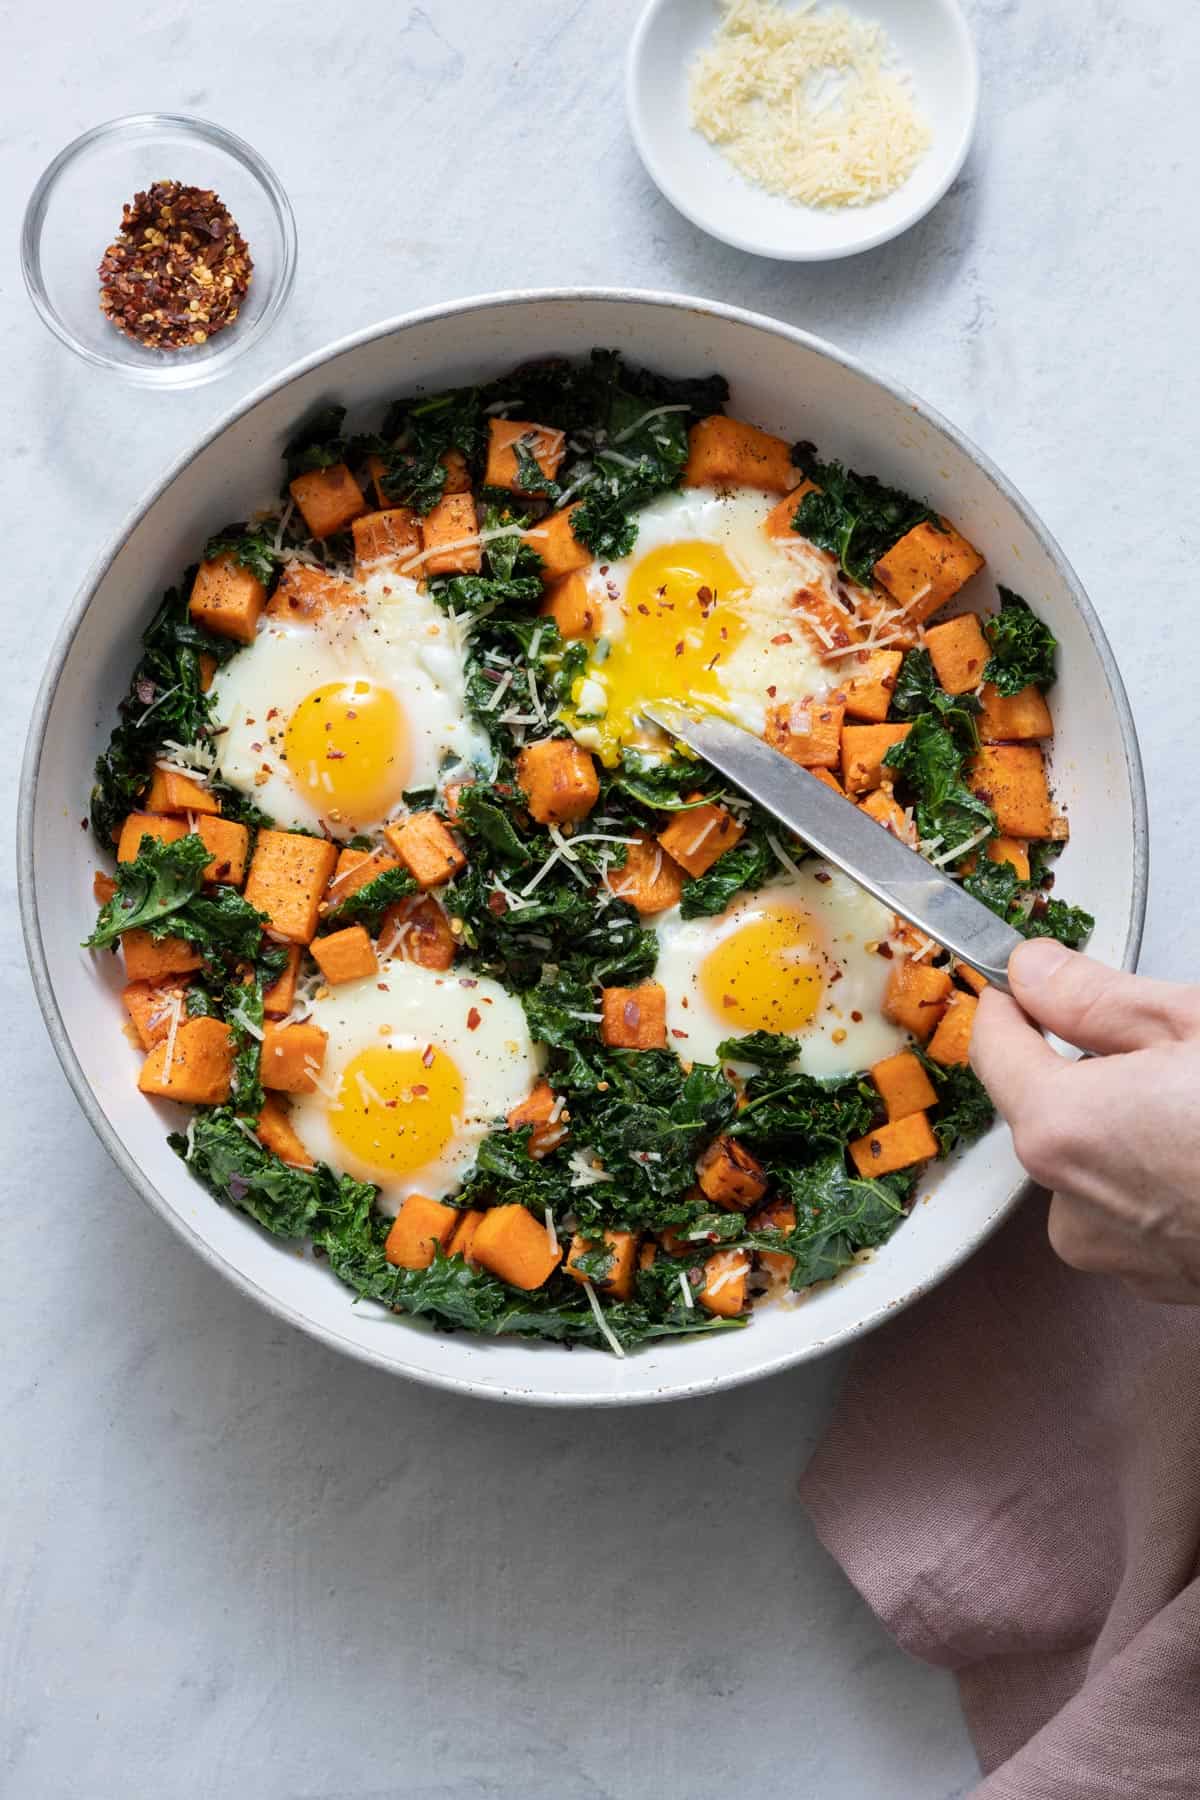 Skillet with the cooked eggs and garnished with parmesan cheese and red pepper flakes and knife cutting one of the yolks showing soft yolk spilling into kale/sweet potatoes.